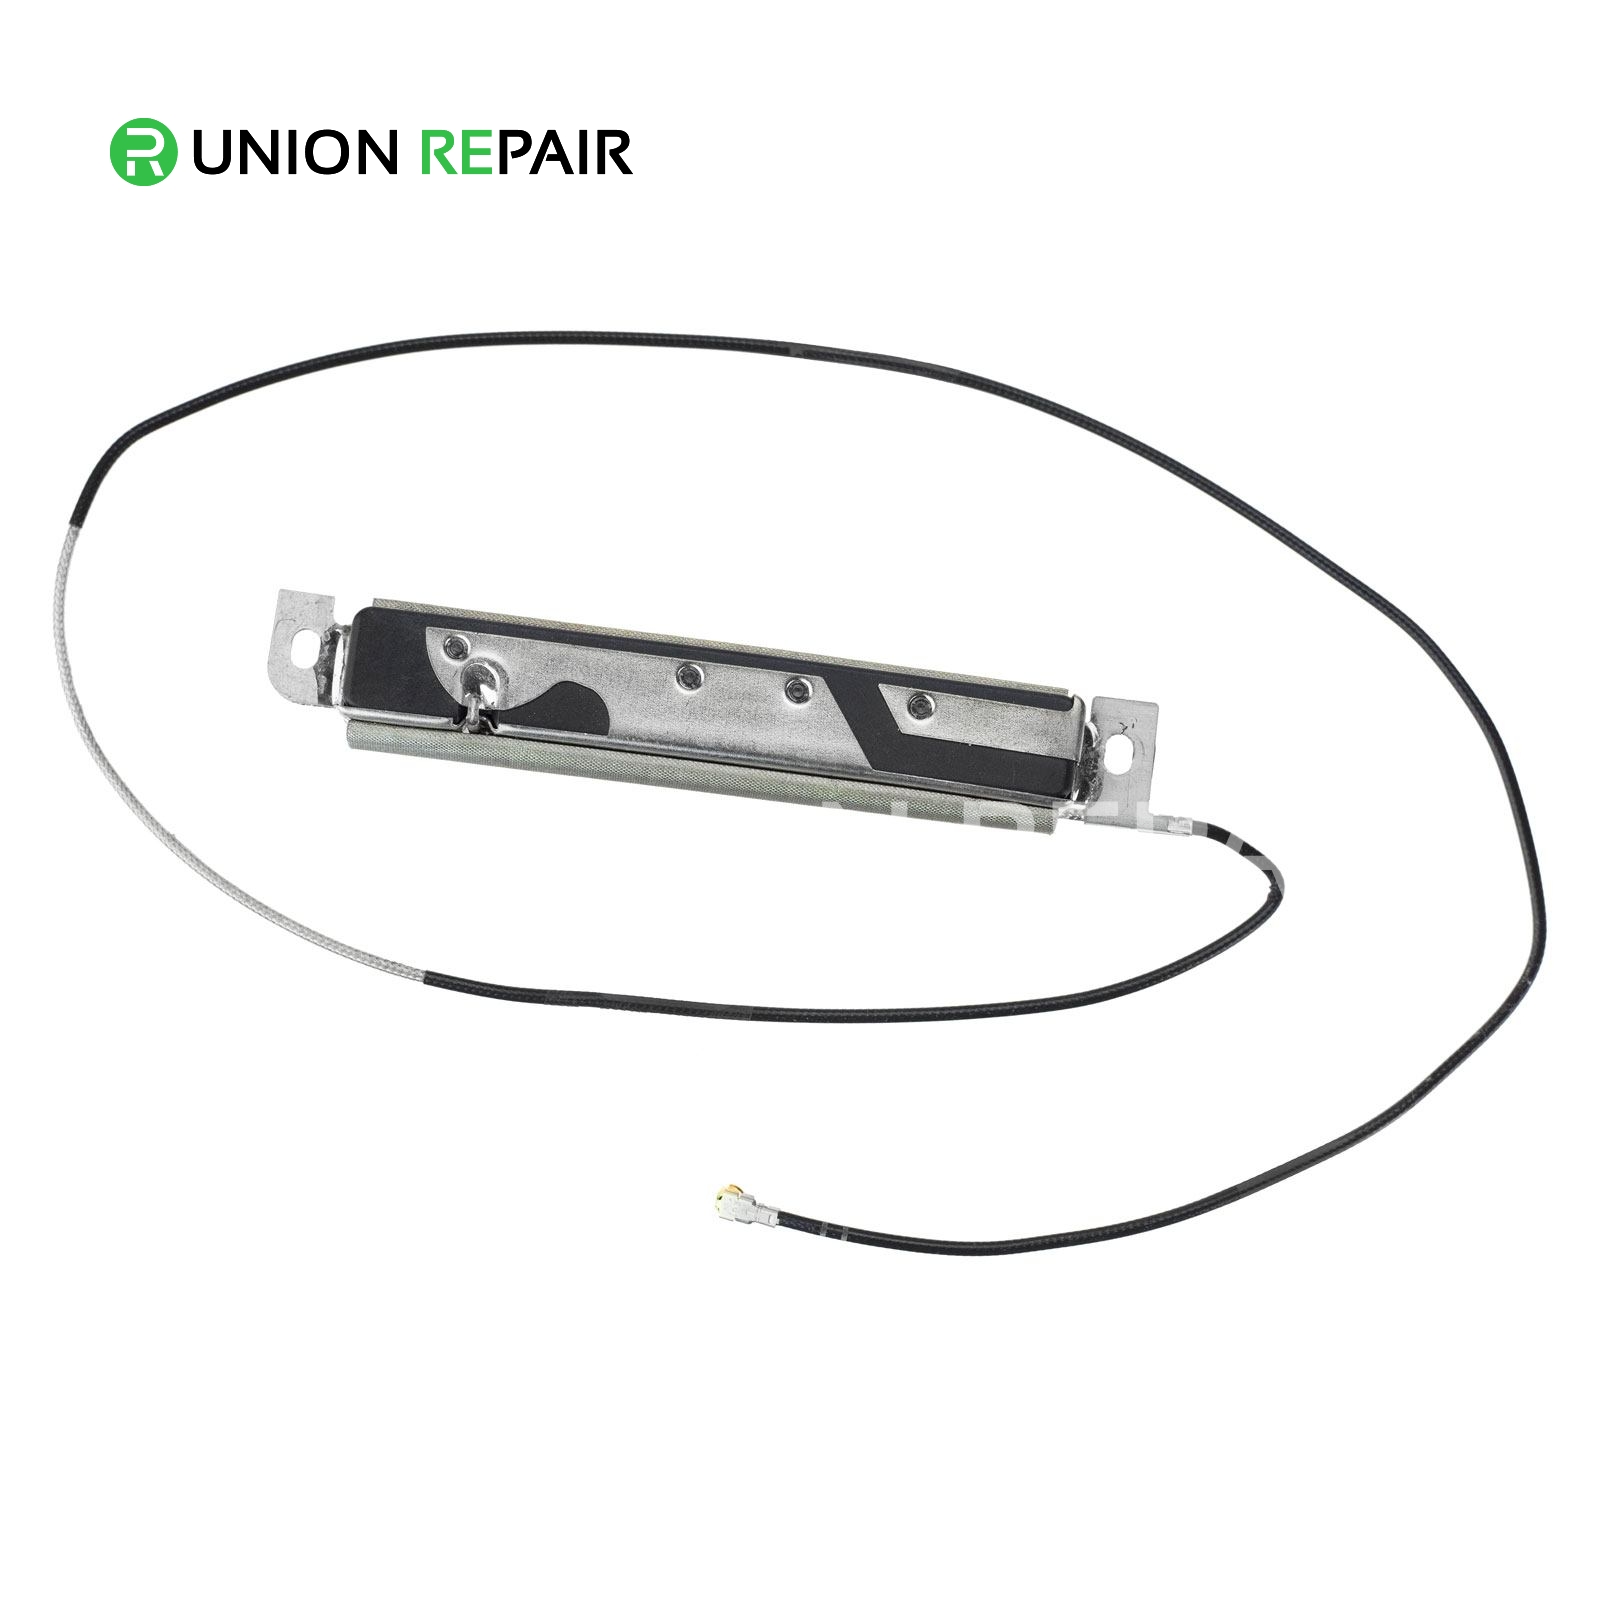 Left AirPort Antenna Cable for iMac 21.5" A1311 (Mid 2011 - Late 2011)